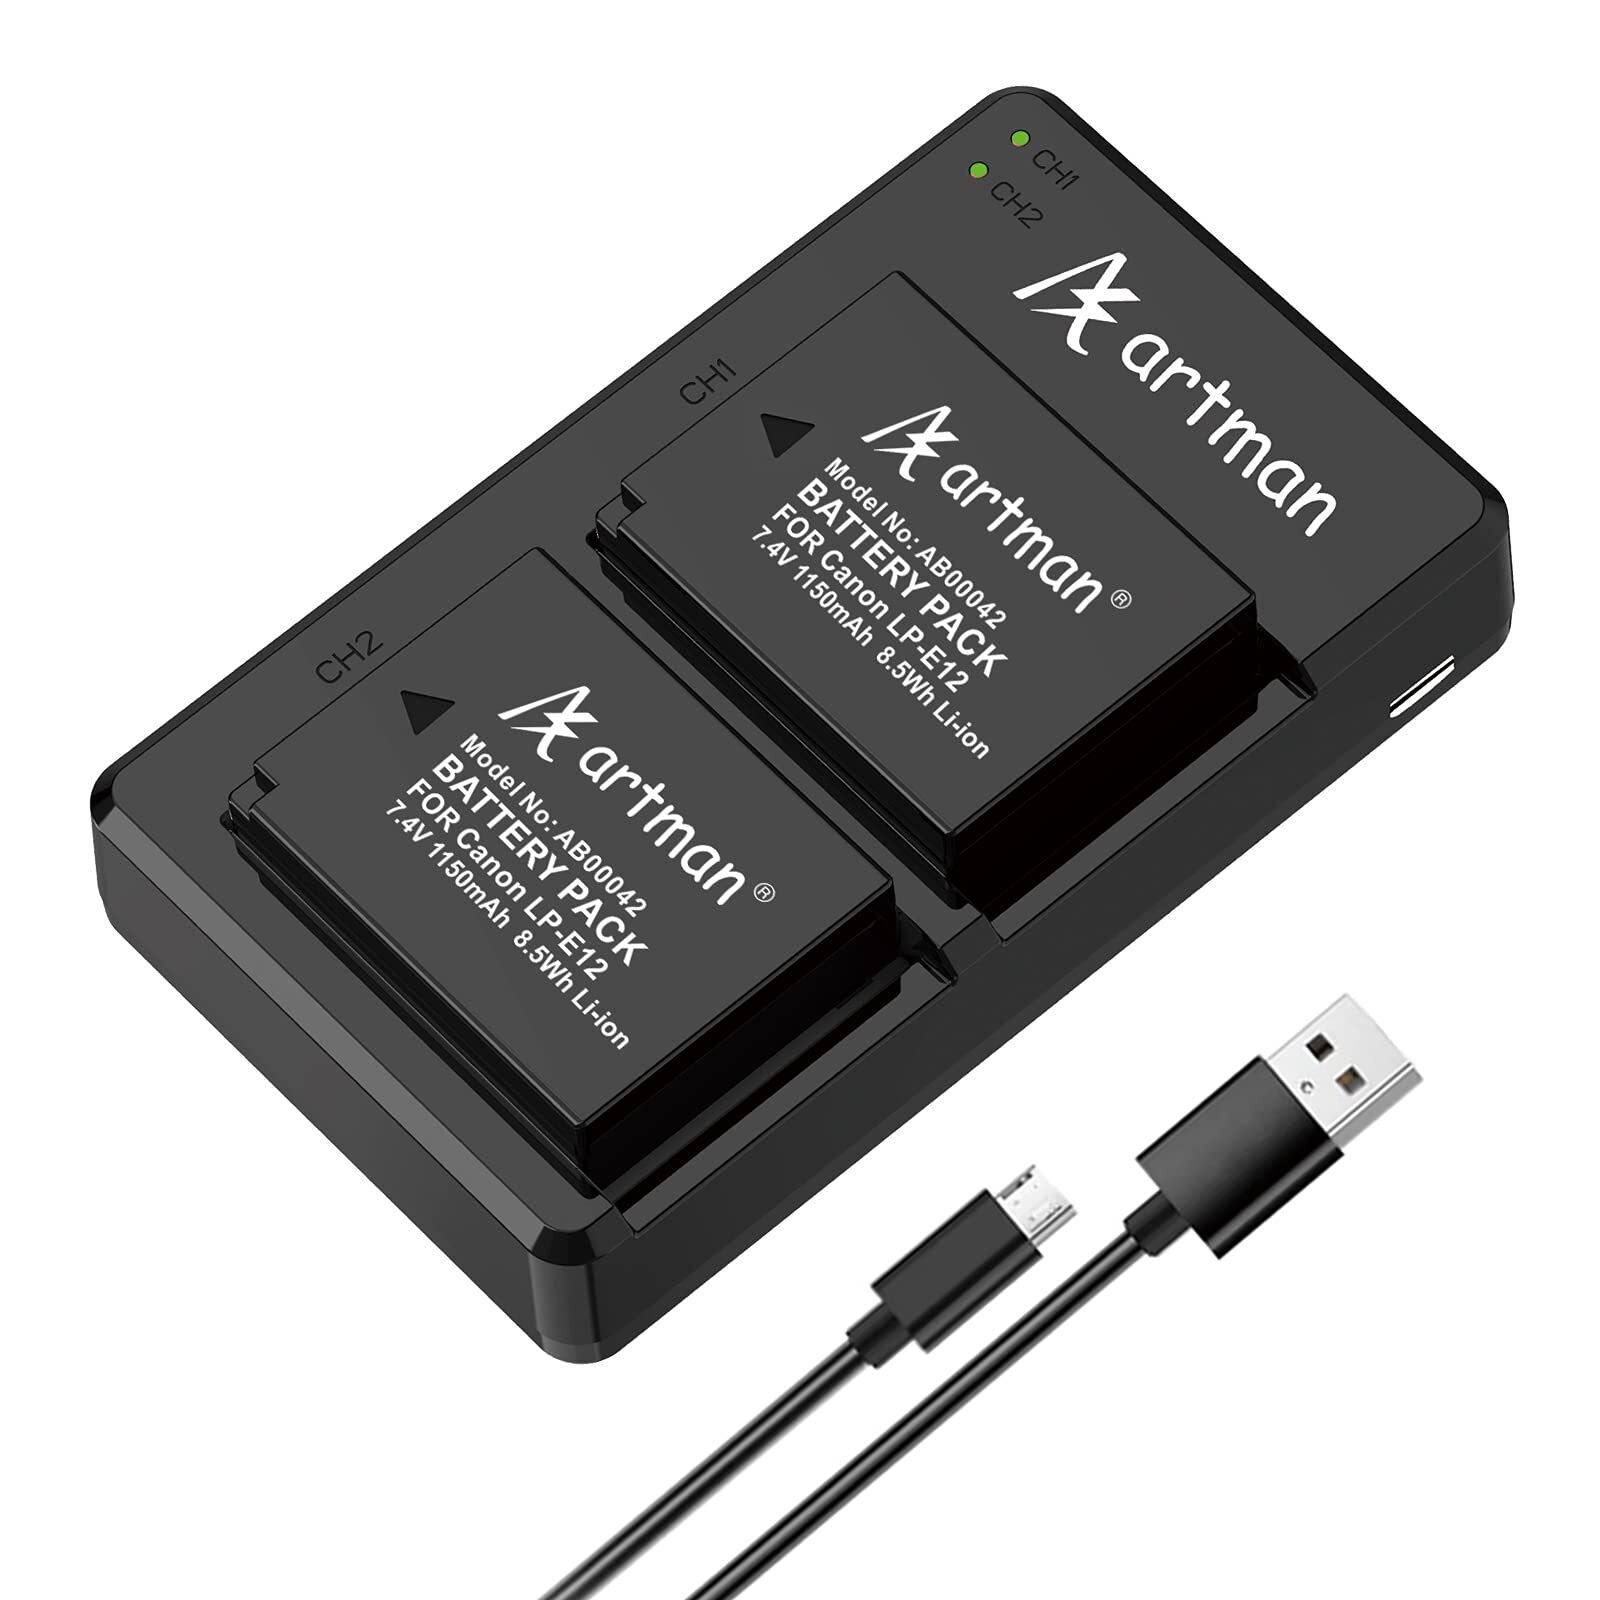 Aanwezigheid Array jurk Artman LP-E12 Battery and Dual Micro USB Charger Kit for Canon EOS M50, EOS  M50 Mark II, EOS M, EOS M2, M II, EOS M10, EOS M100, EOS M200, SX70 HS,  Rebel